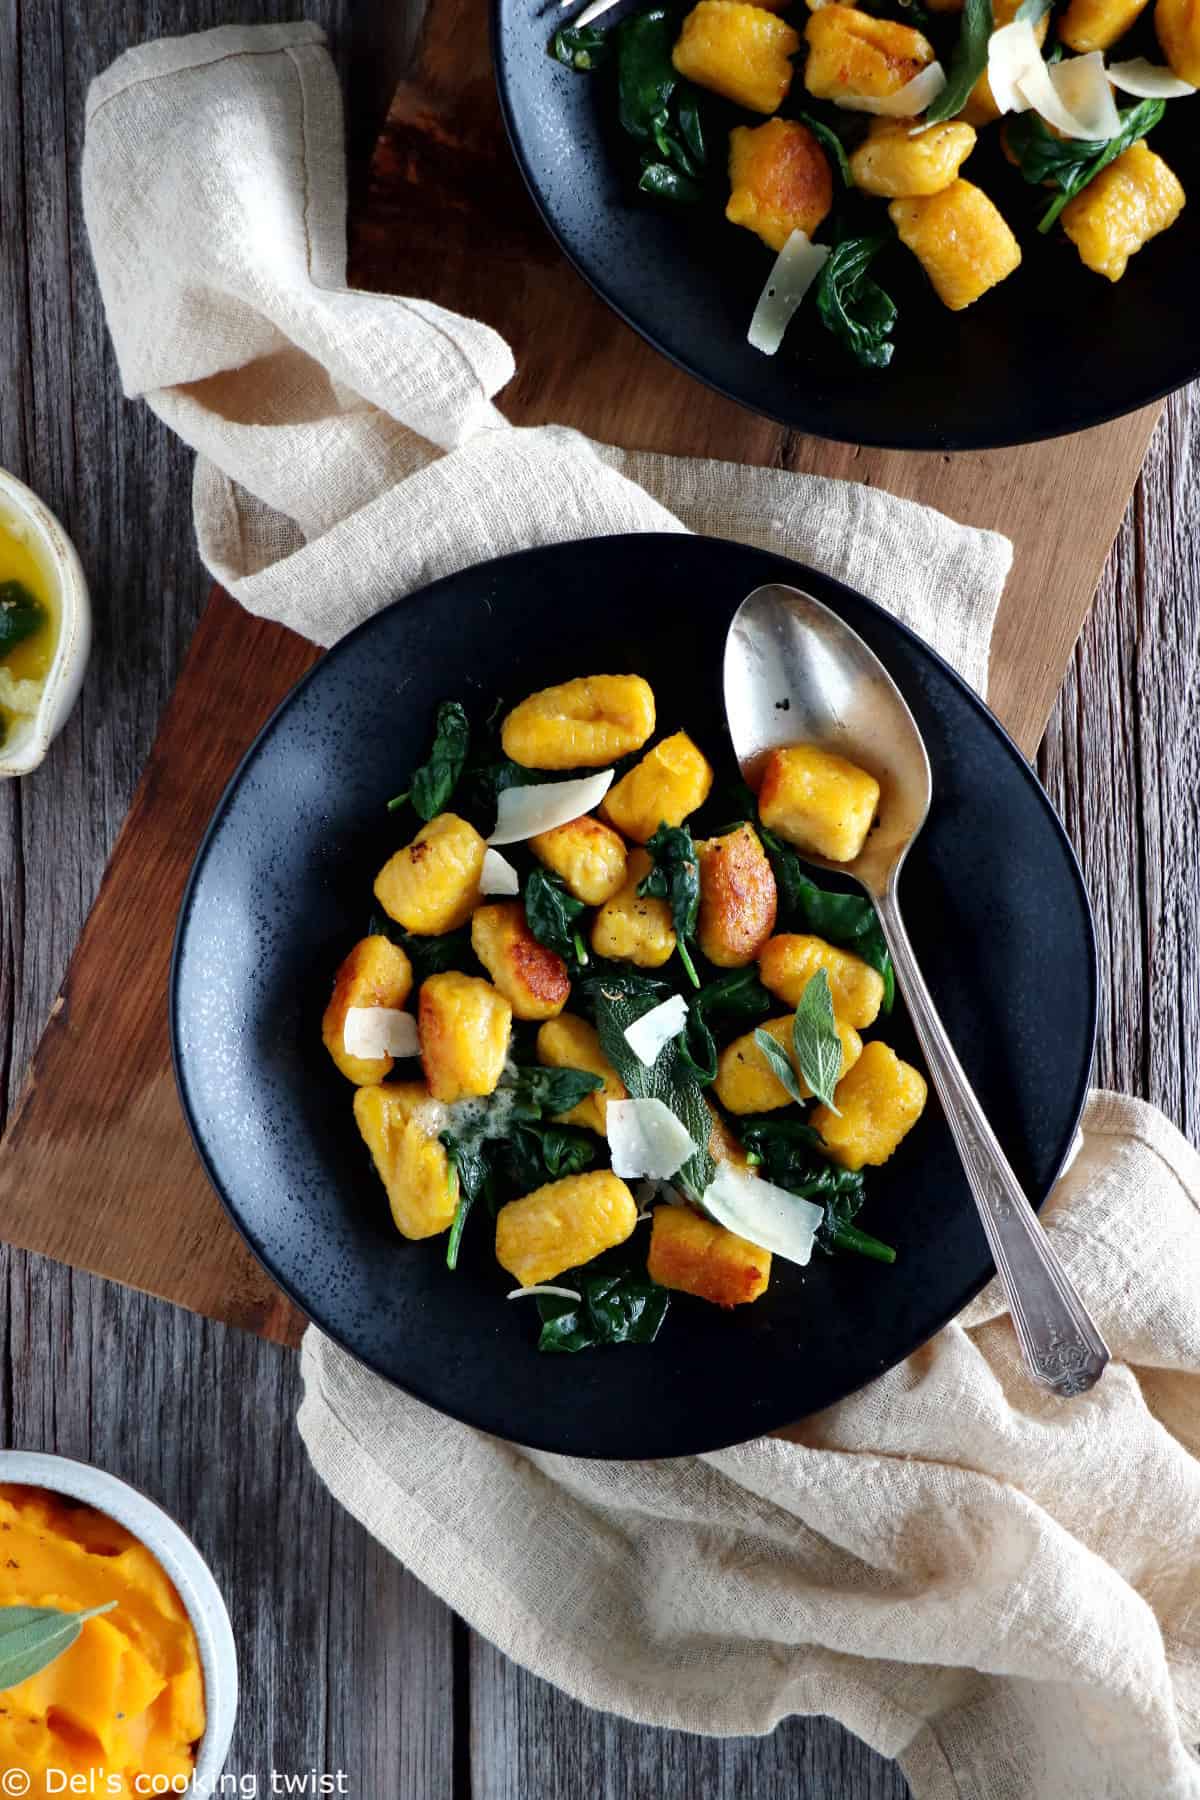 Learn how to make homemade butternut squash gnocchi from scratch with no effort. Serve with lemon butter sauce and you've got the perfect plant-based dish to impress your guests.